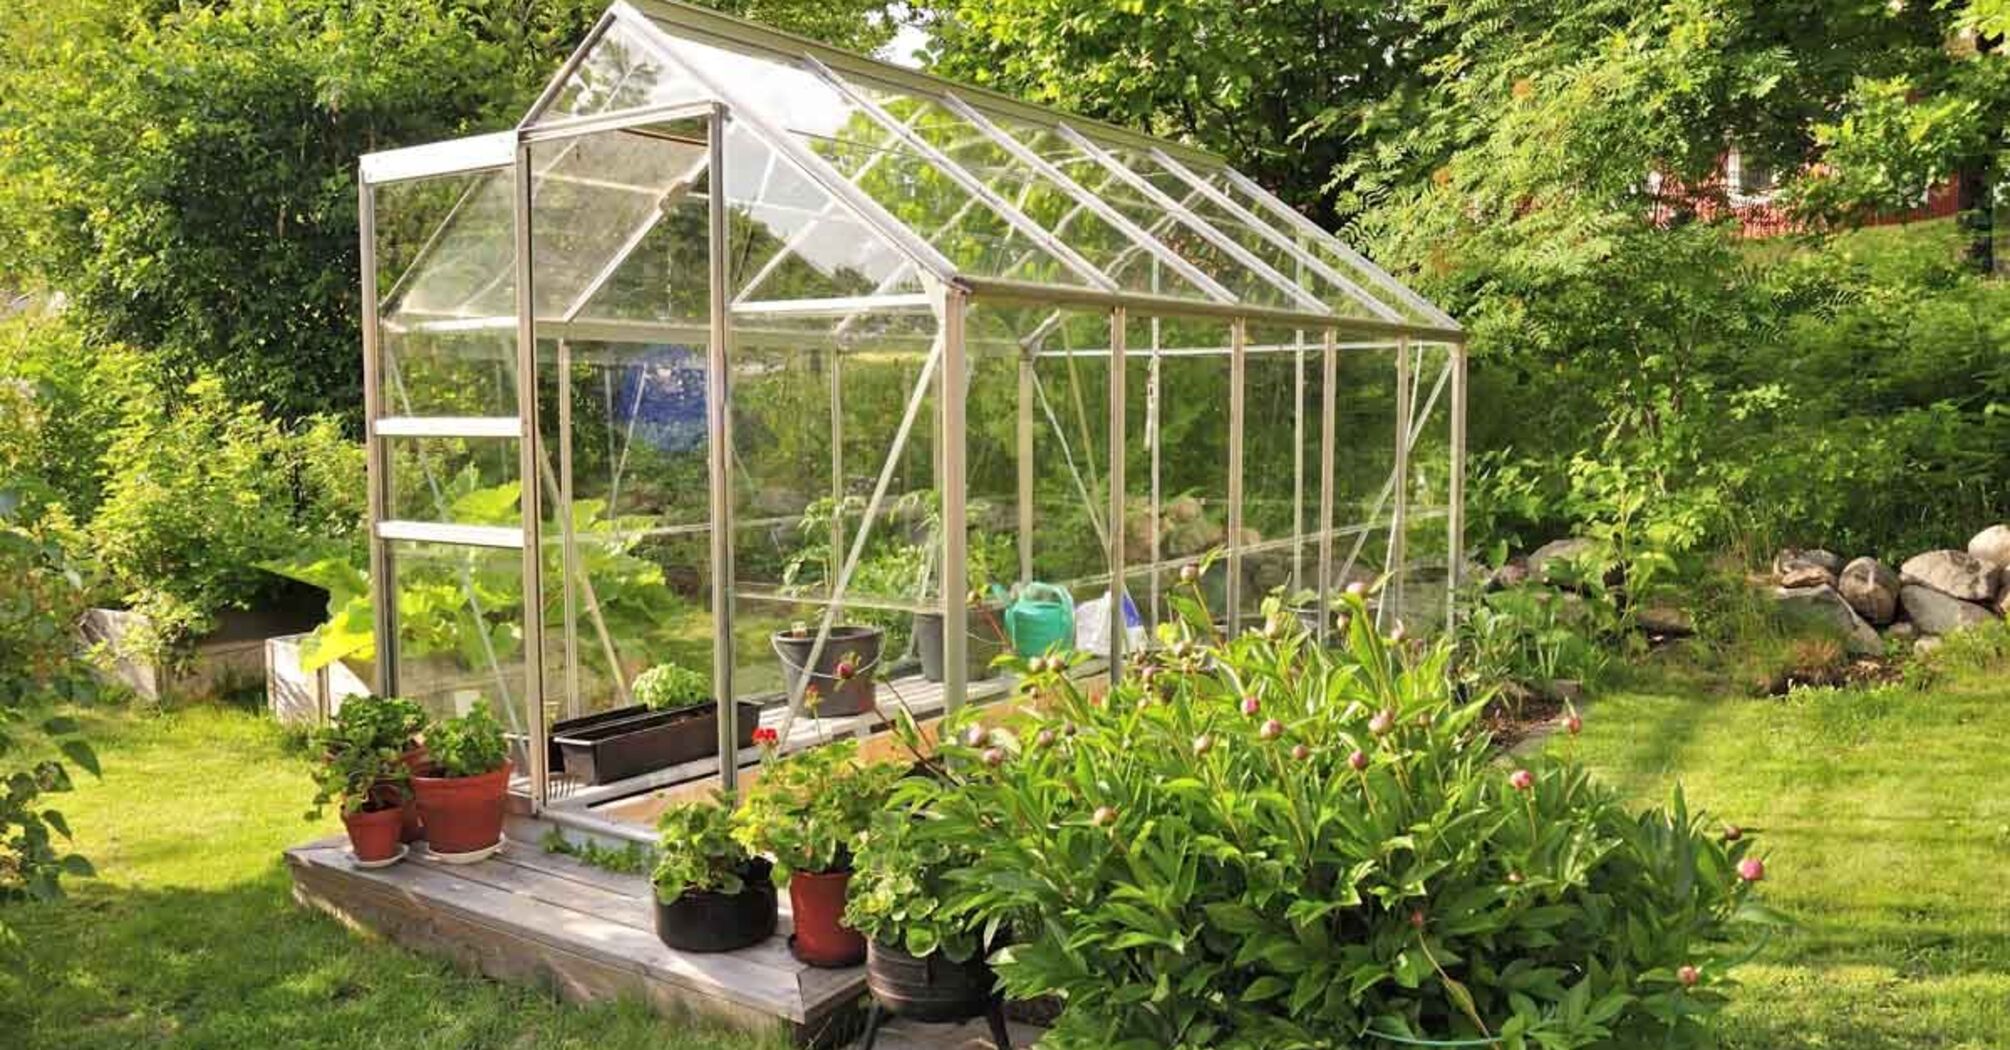 How to choose the best greenhouse for your site